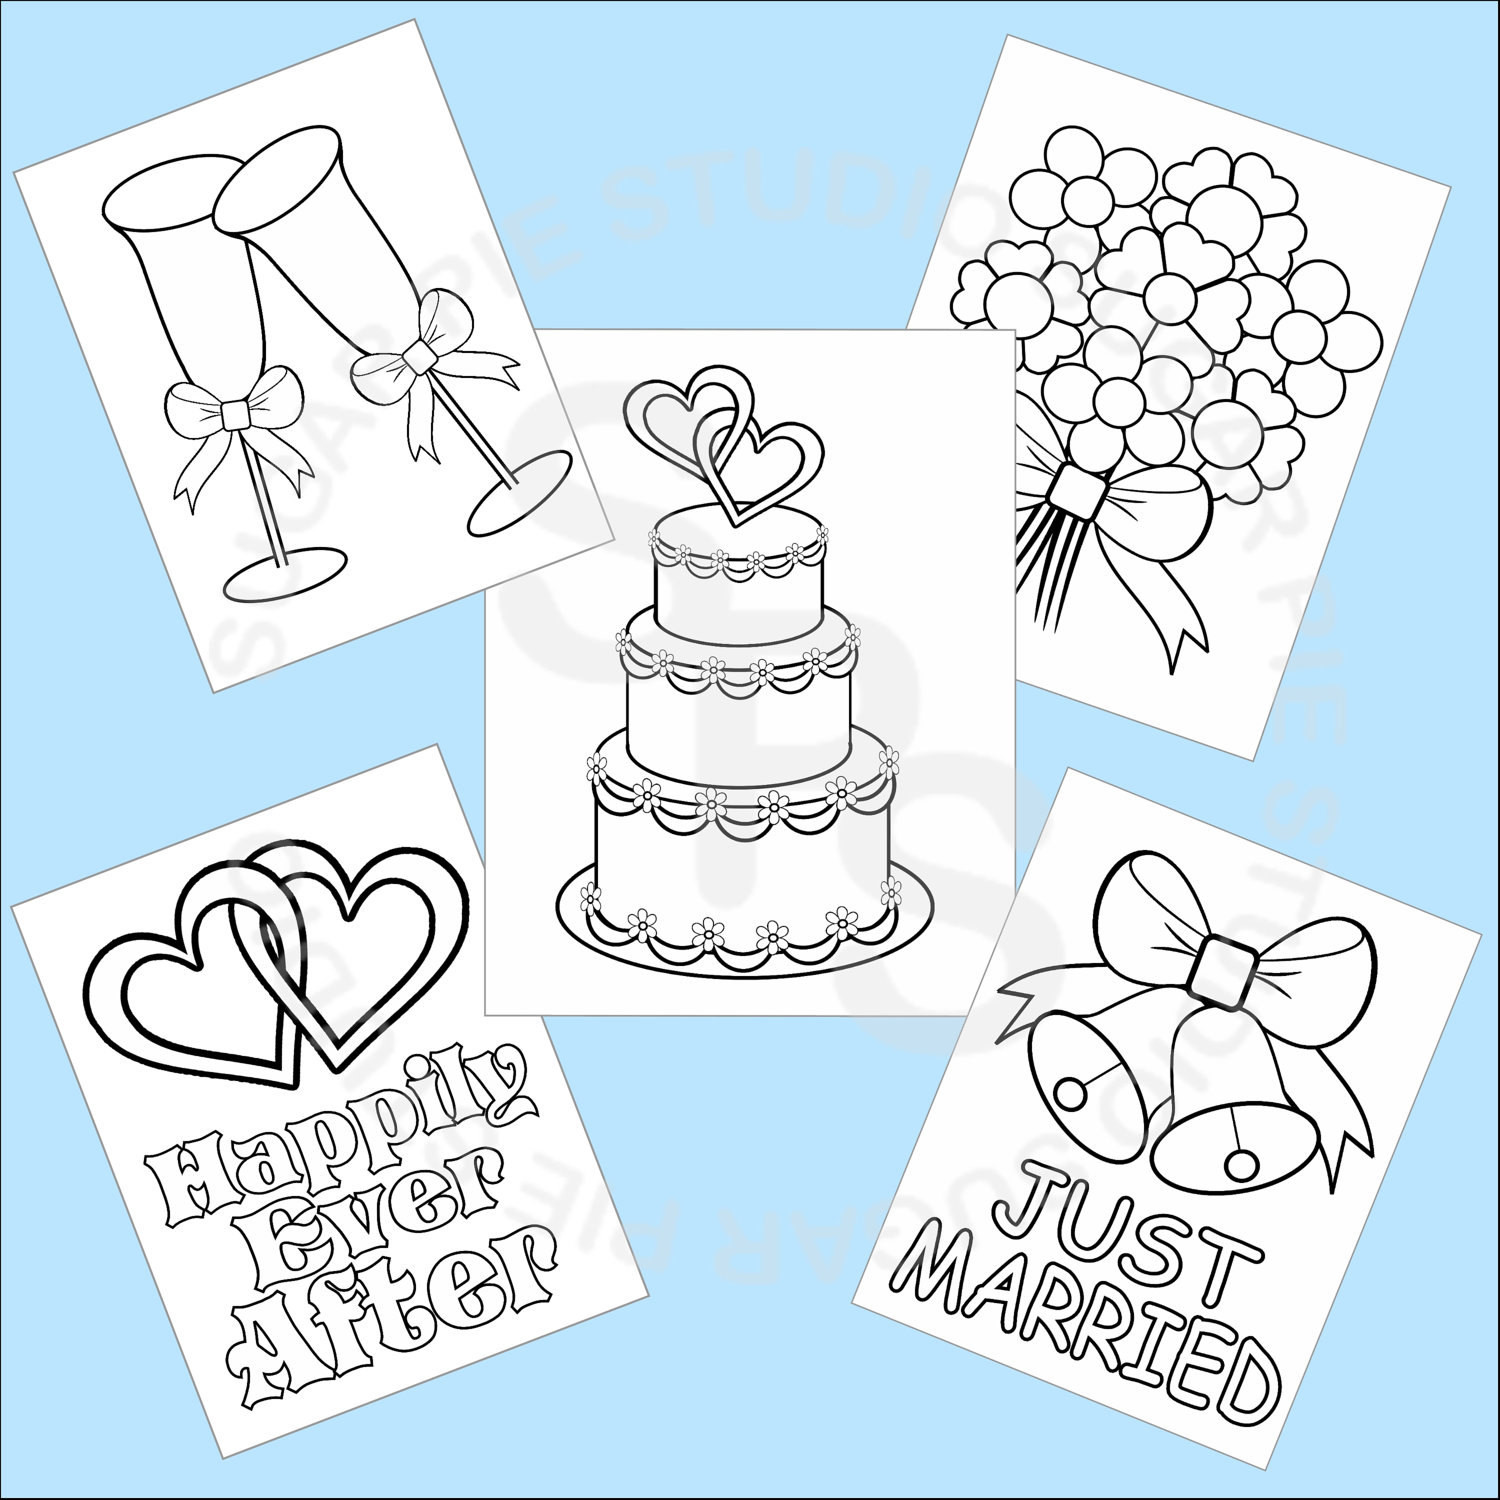 Printable Coloring Pages Kids
 5 Printable Wedding Favor Kids coloring pages by